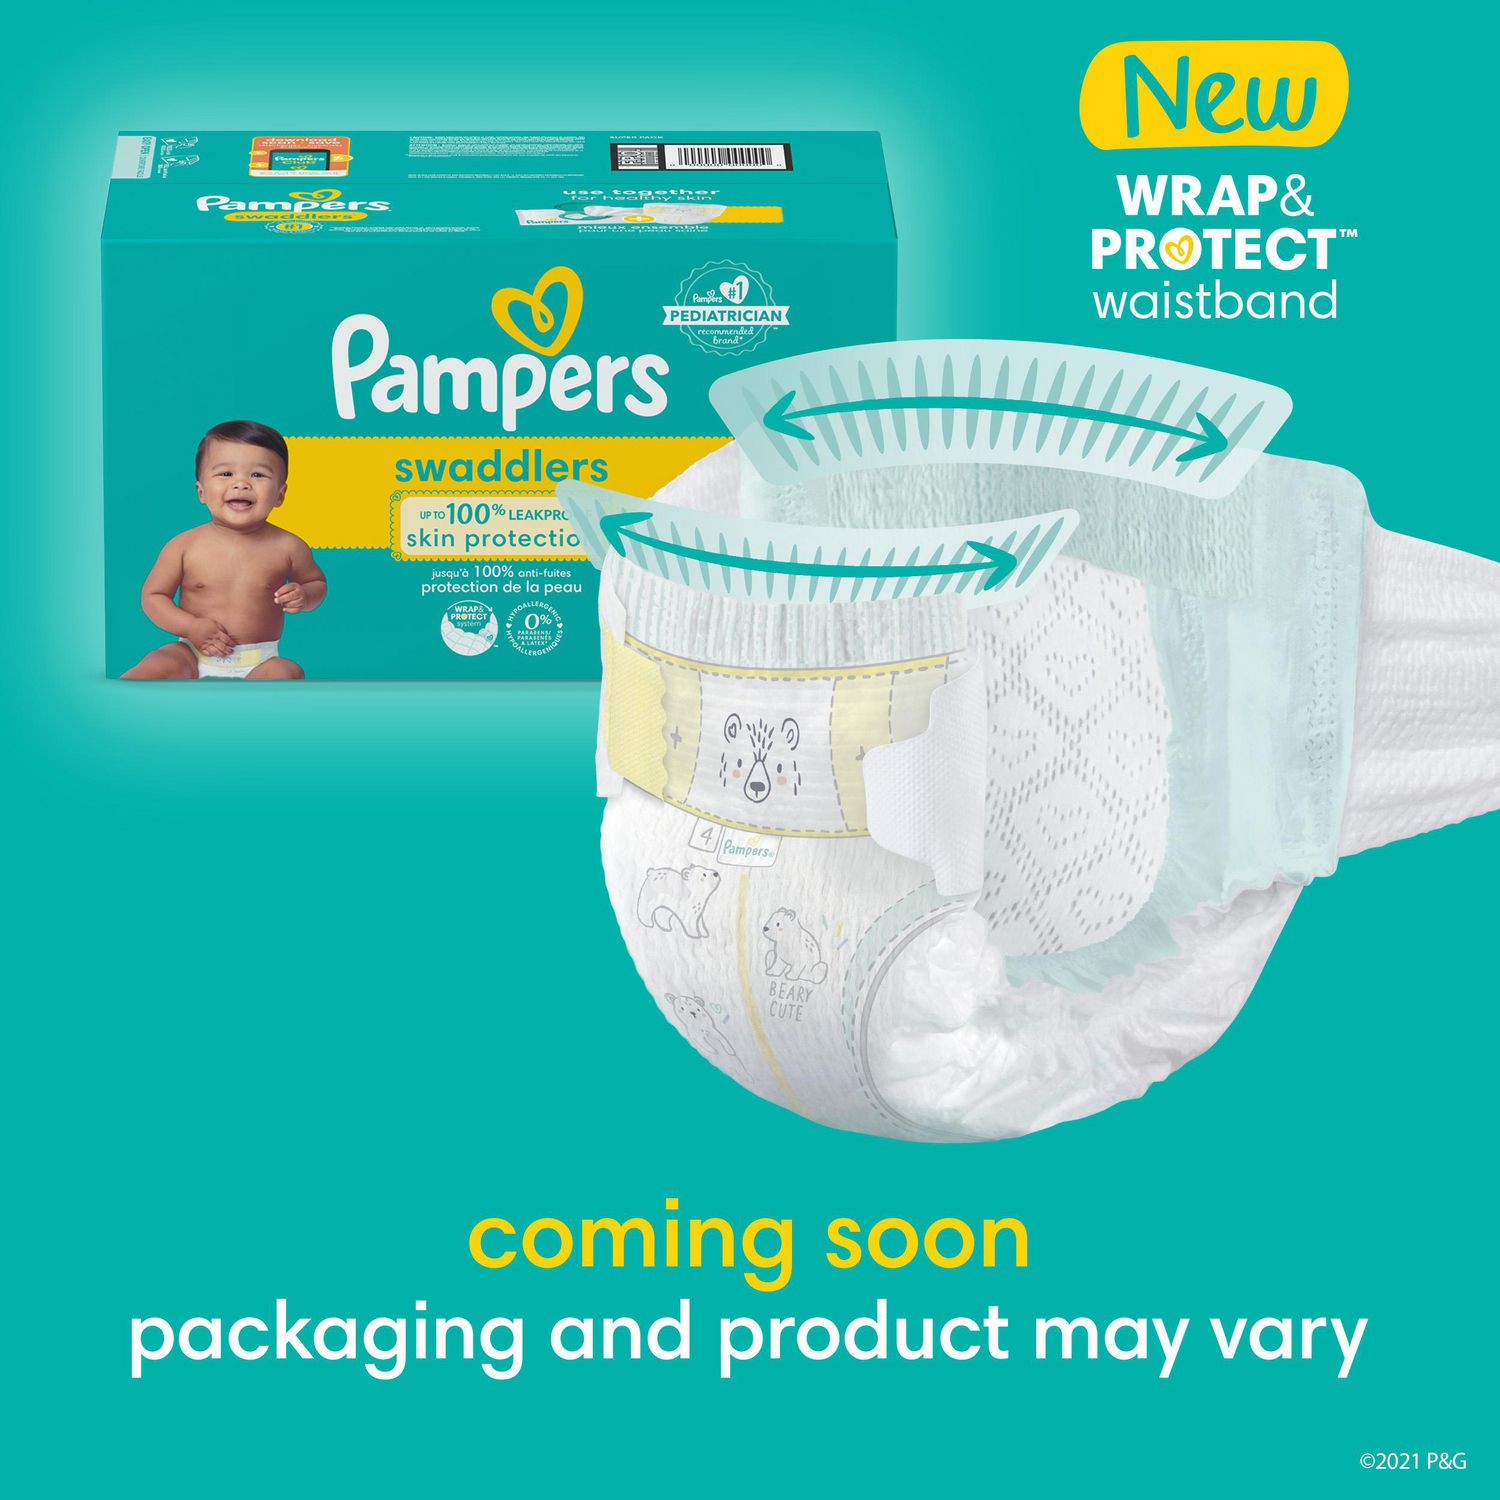 Lot de 58 couches Pampers Sleep&Play taille 3 à prix bas